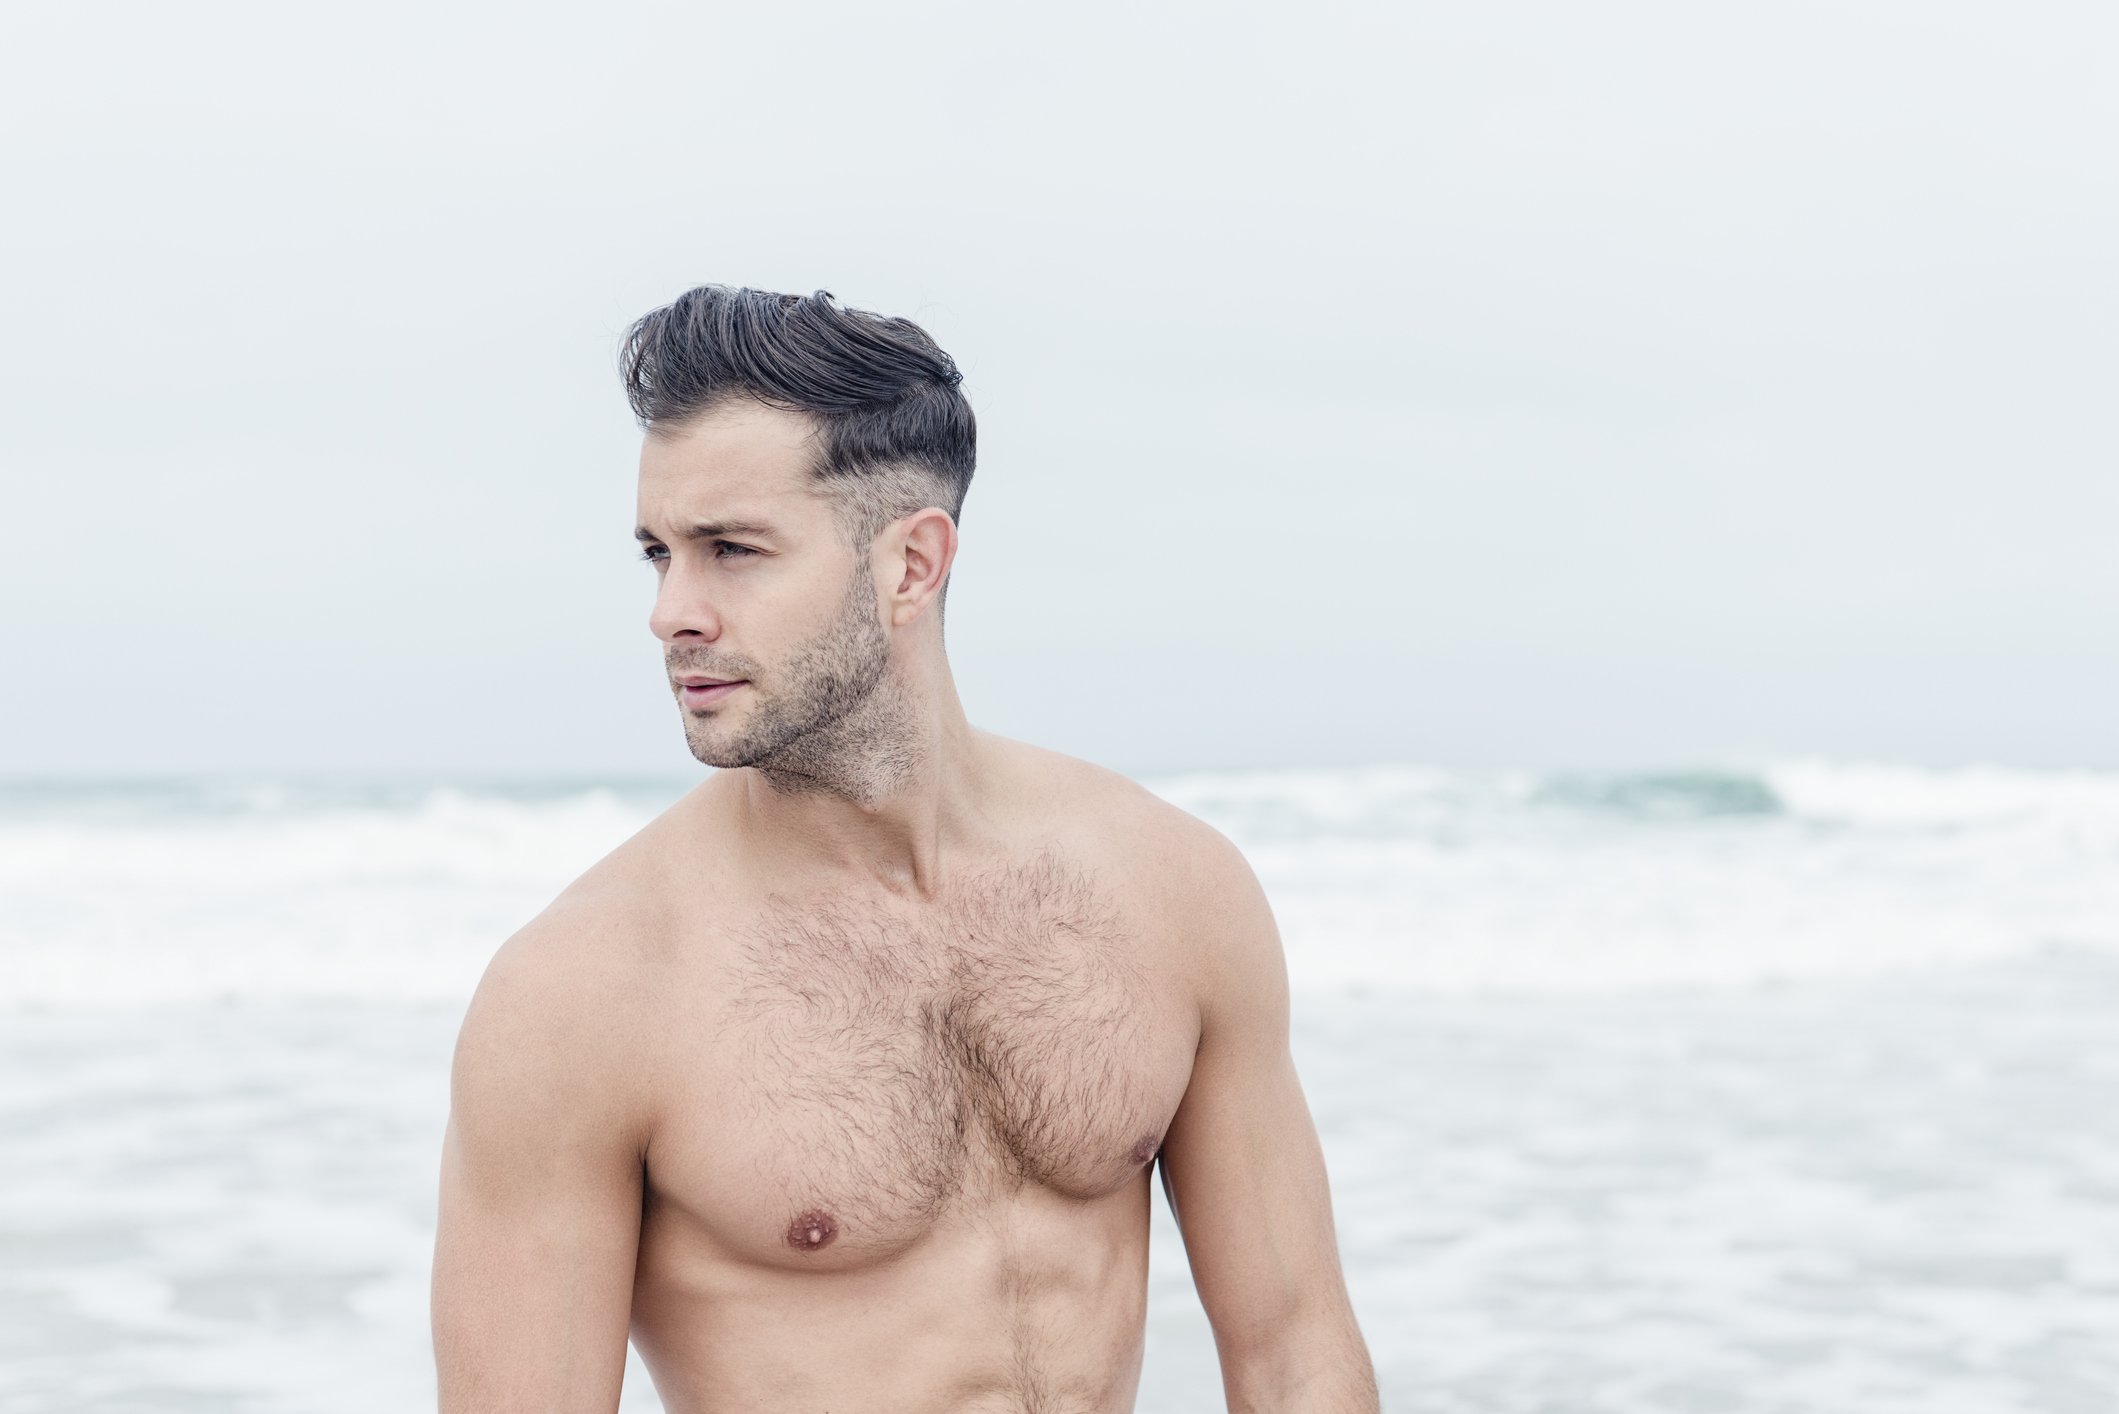 A man with trimmed chest hair | Gillette UK